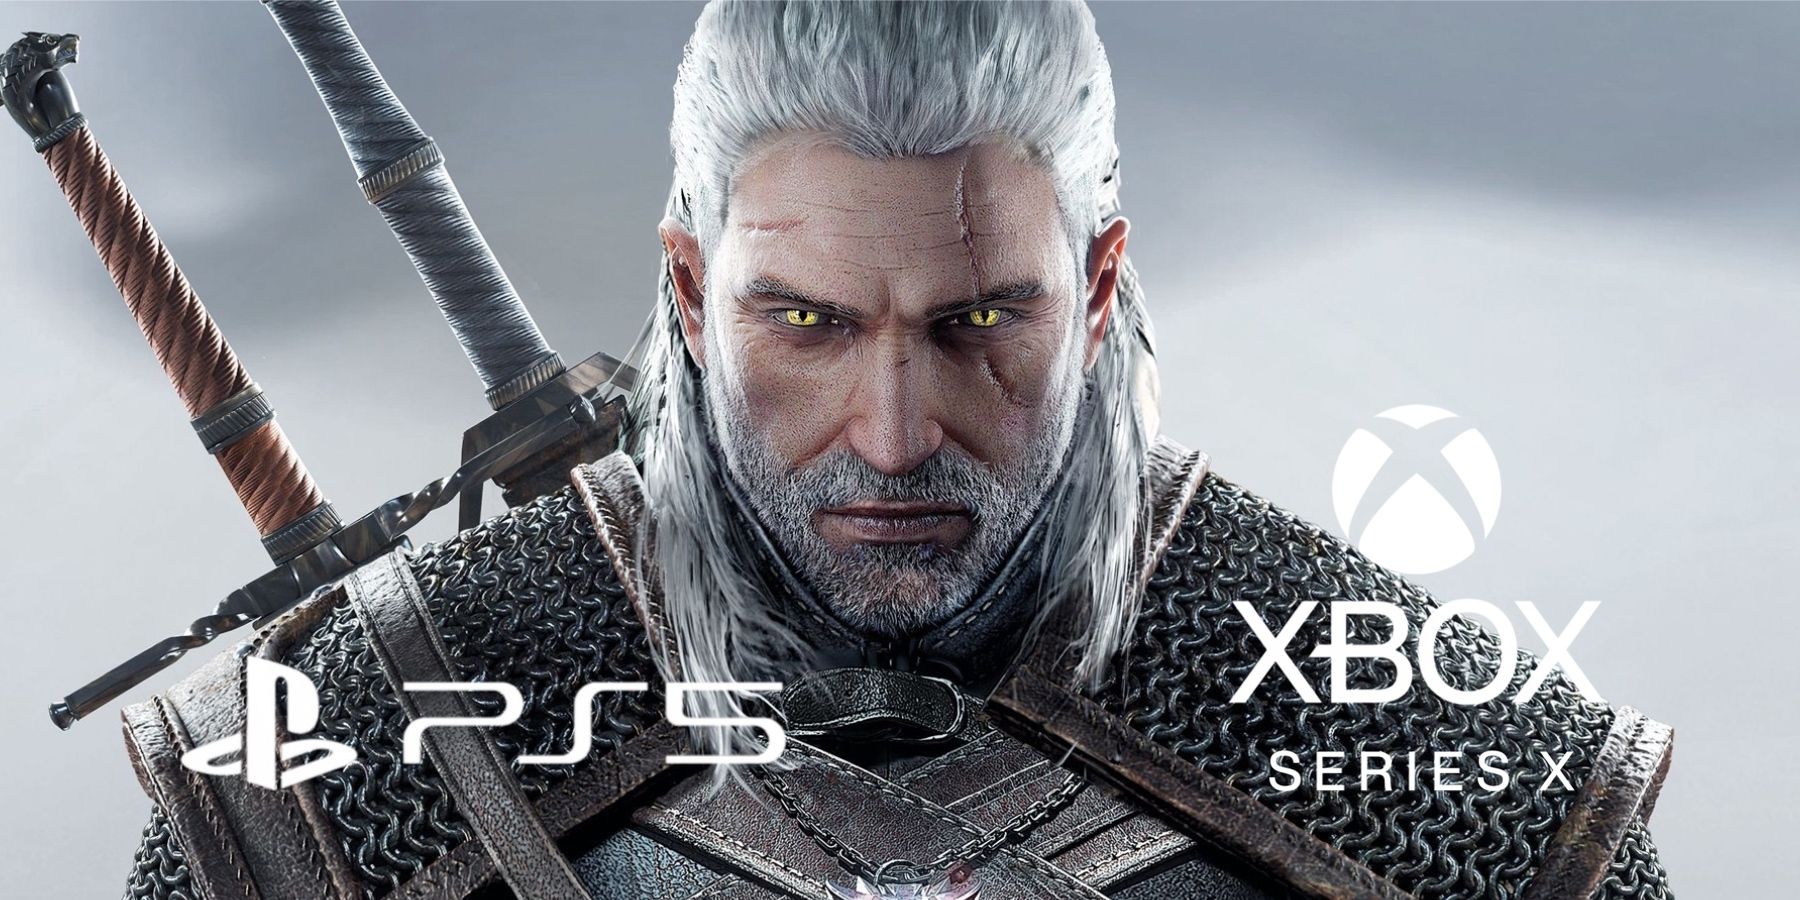 The Witcher 3 PS5 and Xbox Series X port launches next month